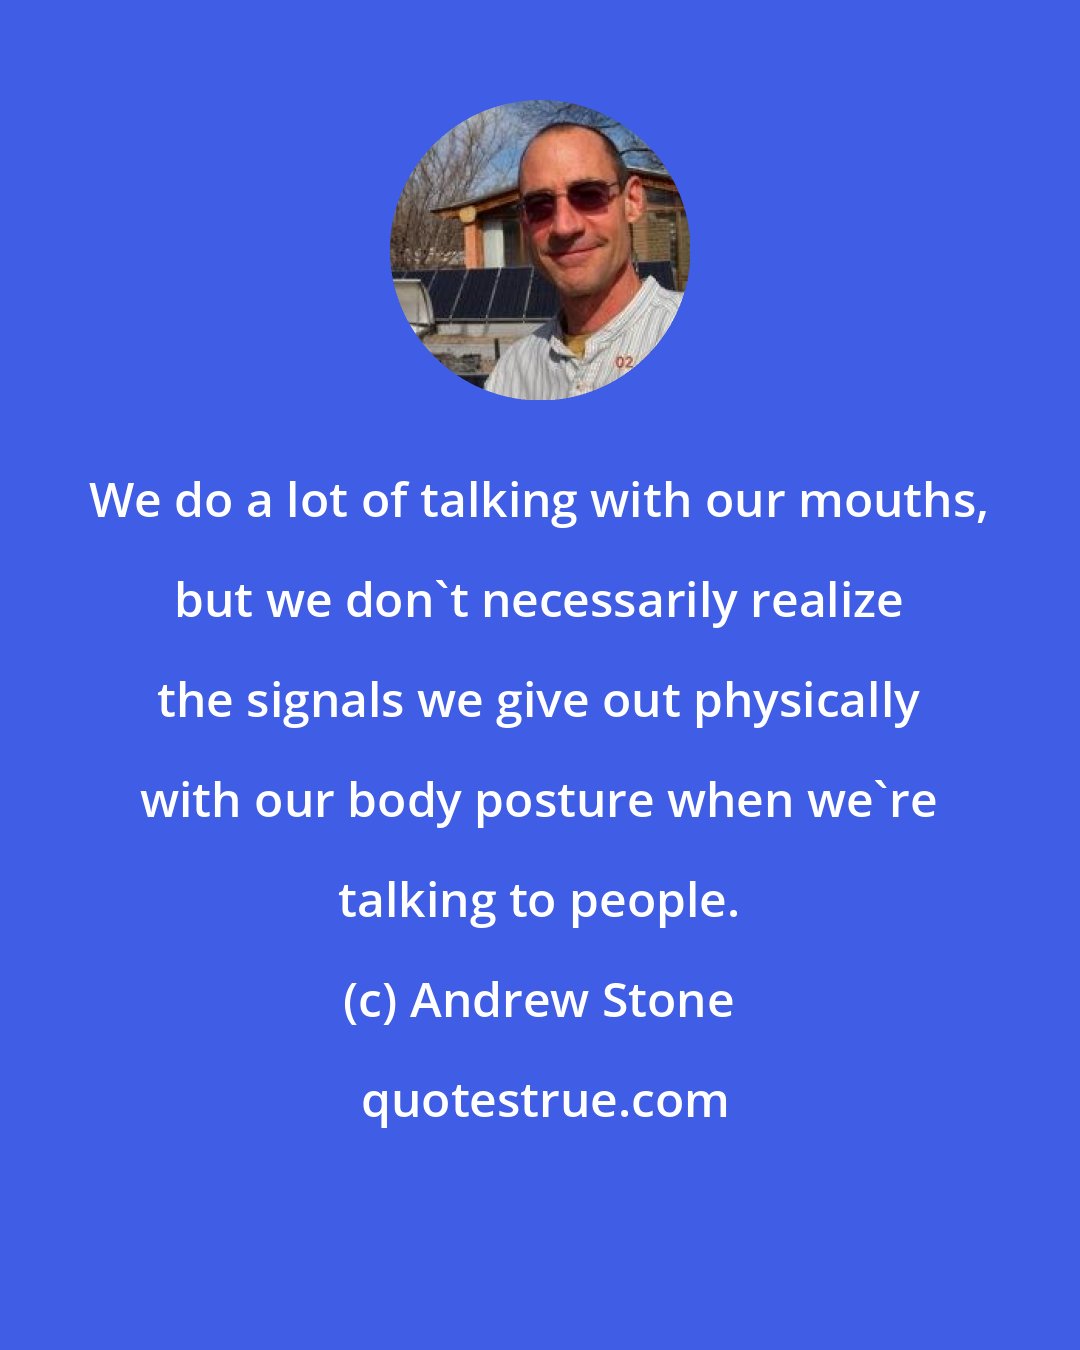 Andrew Stone: We do a lot of talking with our mouths, but we don't necessarily realize the signals we give out physically with our body posture when we're talking to people.